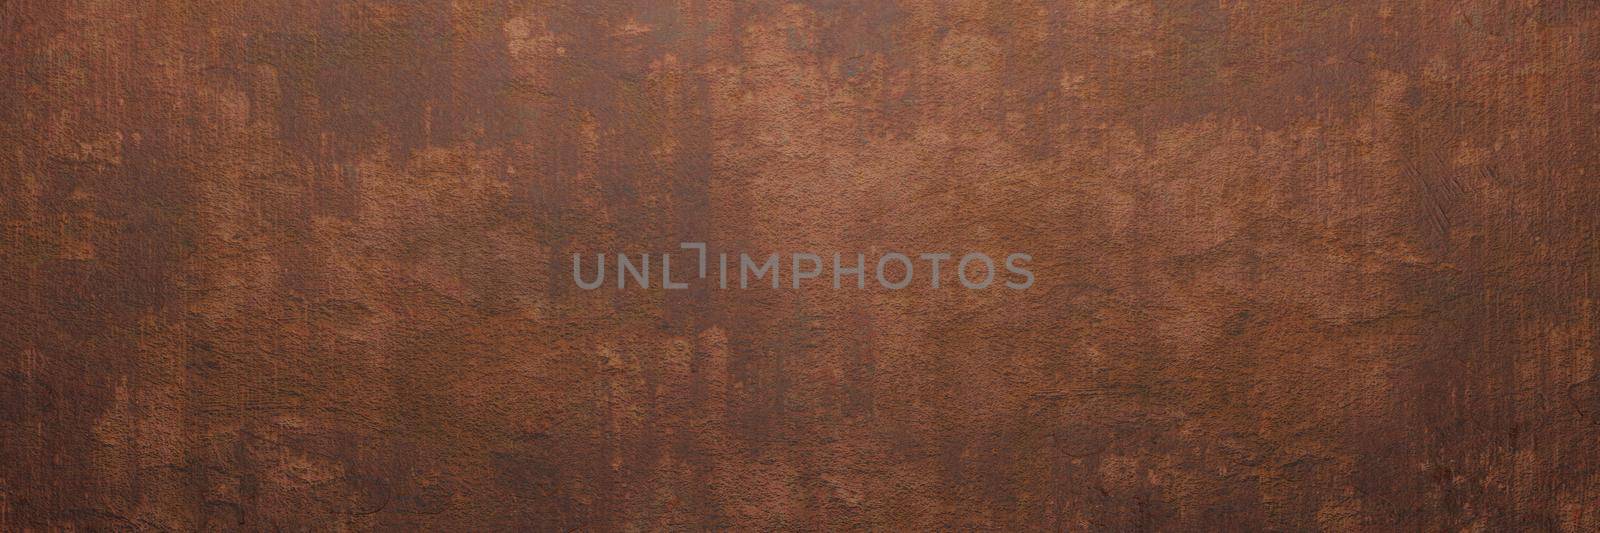 Wheathered rust and scratched steel texture background. 3d illustration by Taut